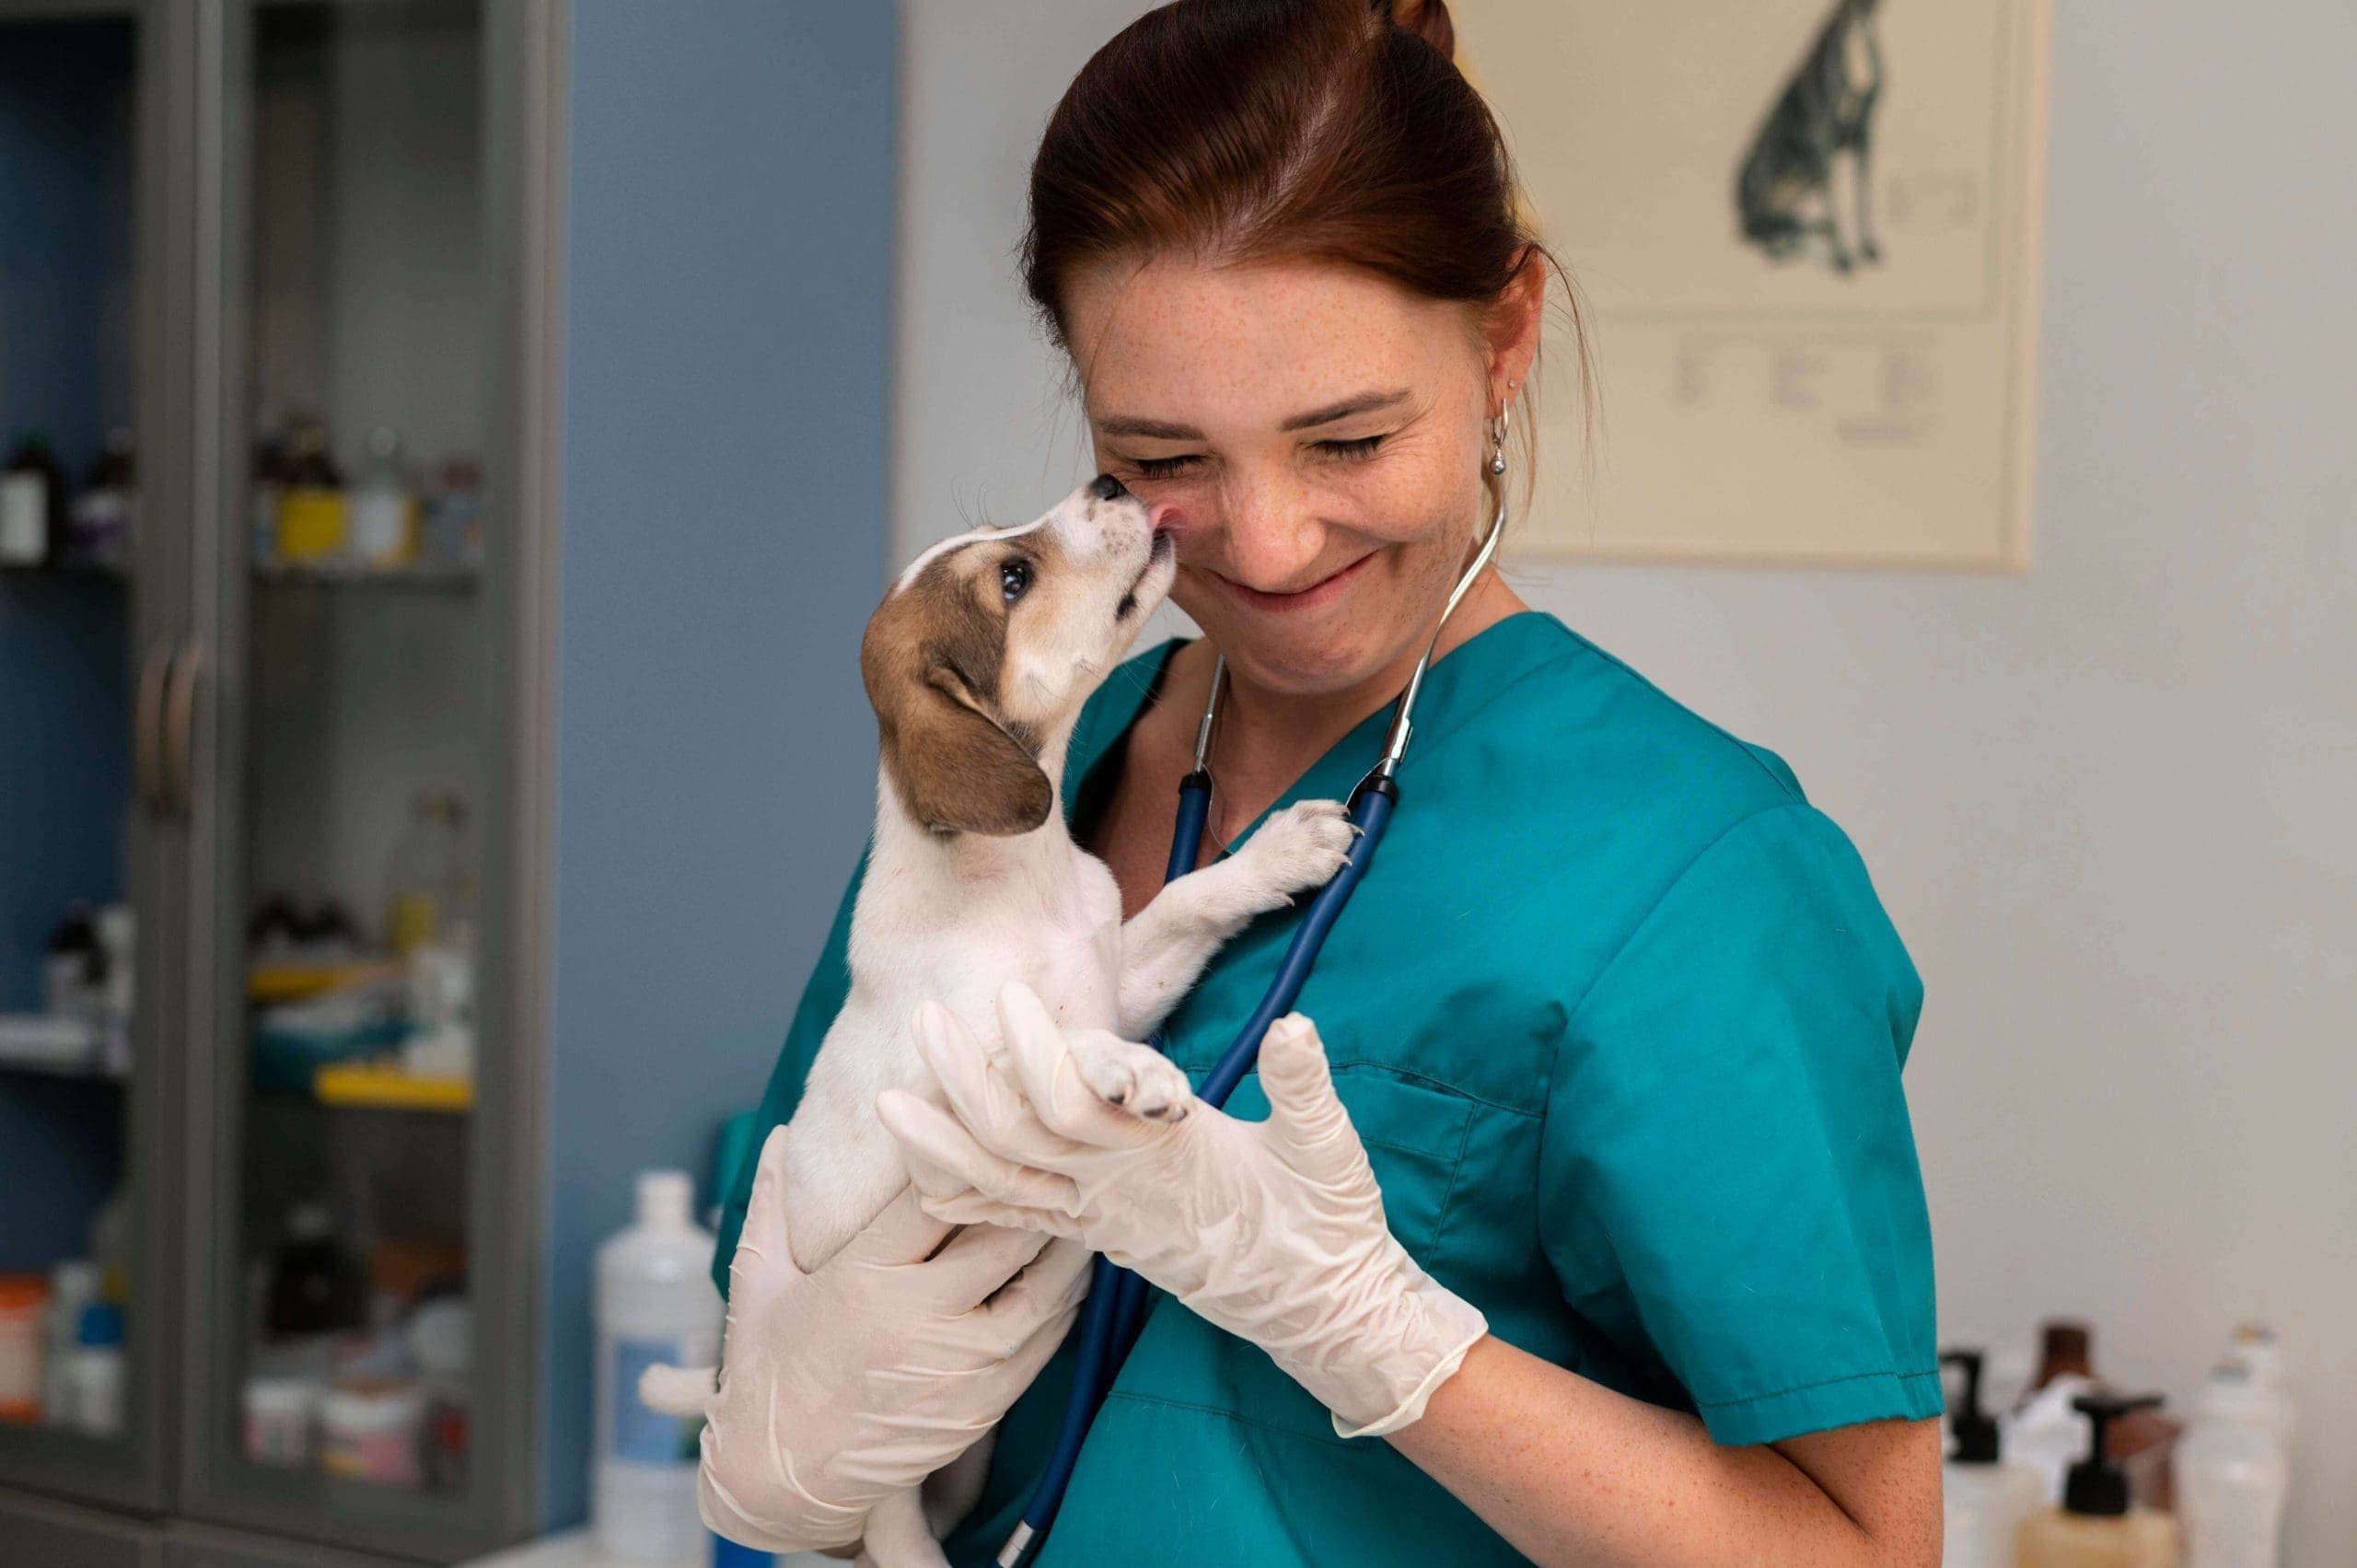 Veterinarian: Caring for Animals as a Career